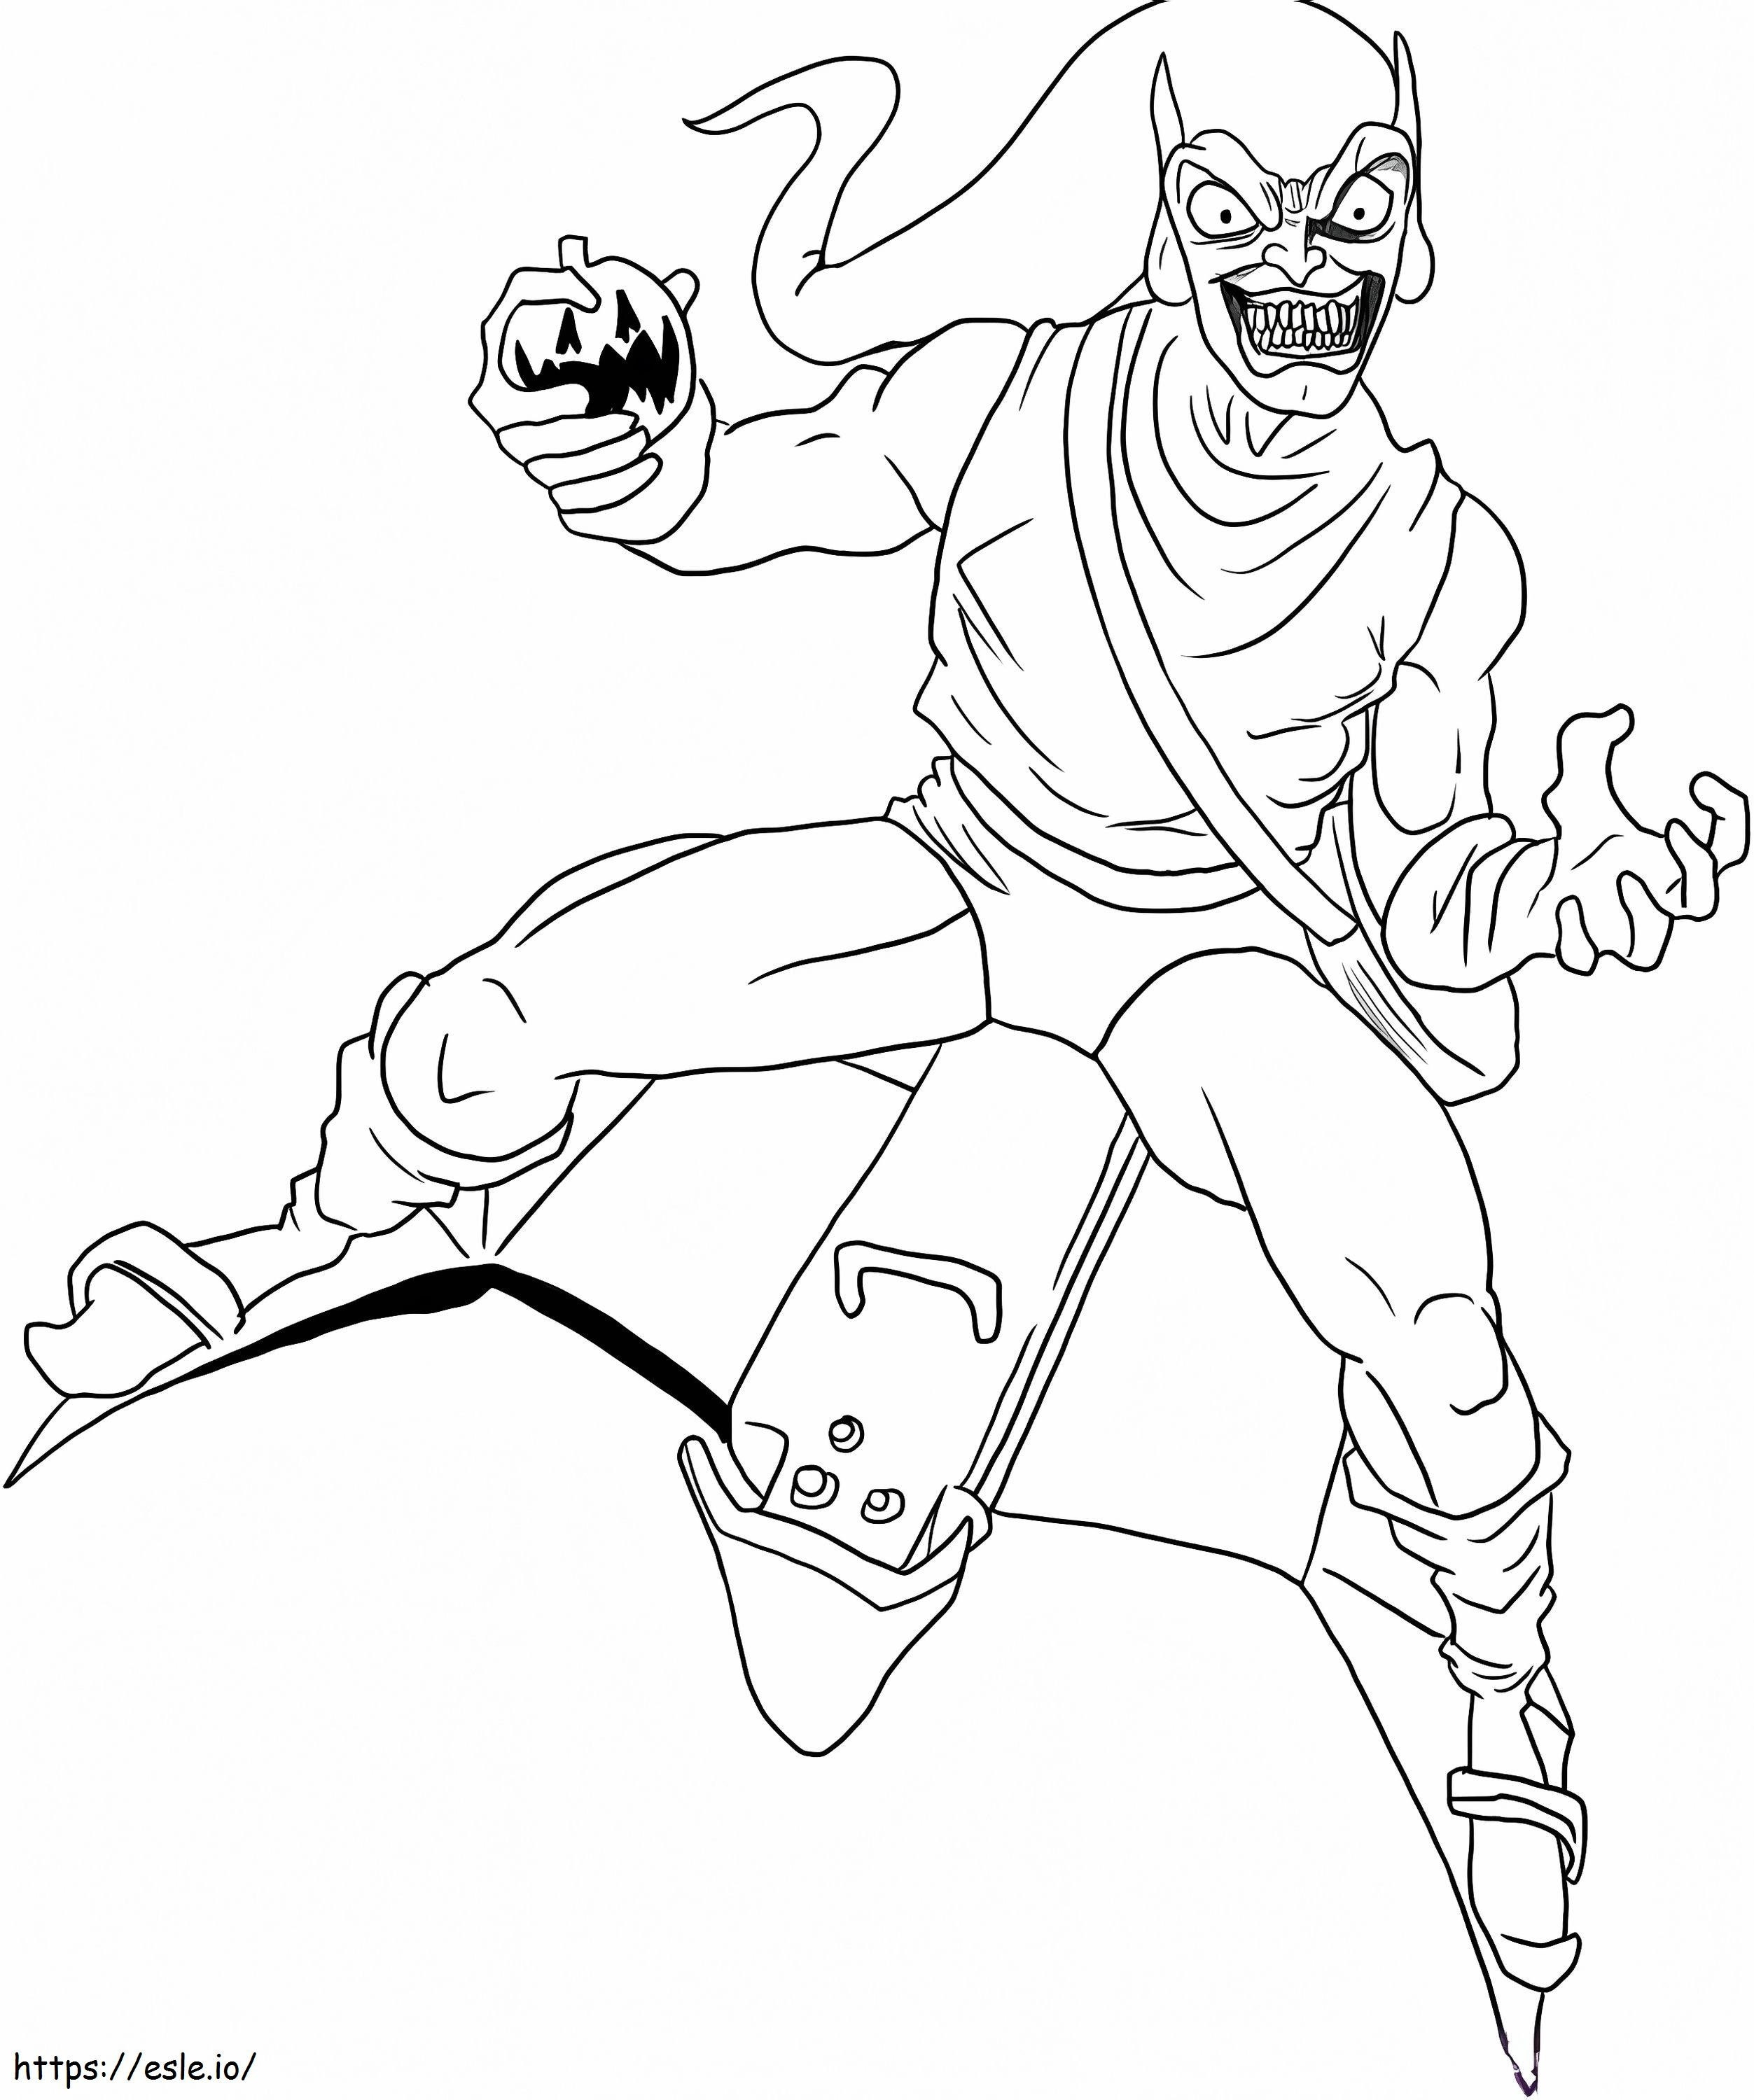 Green Goblin coloring page